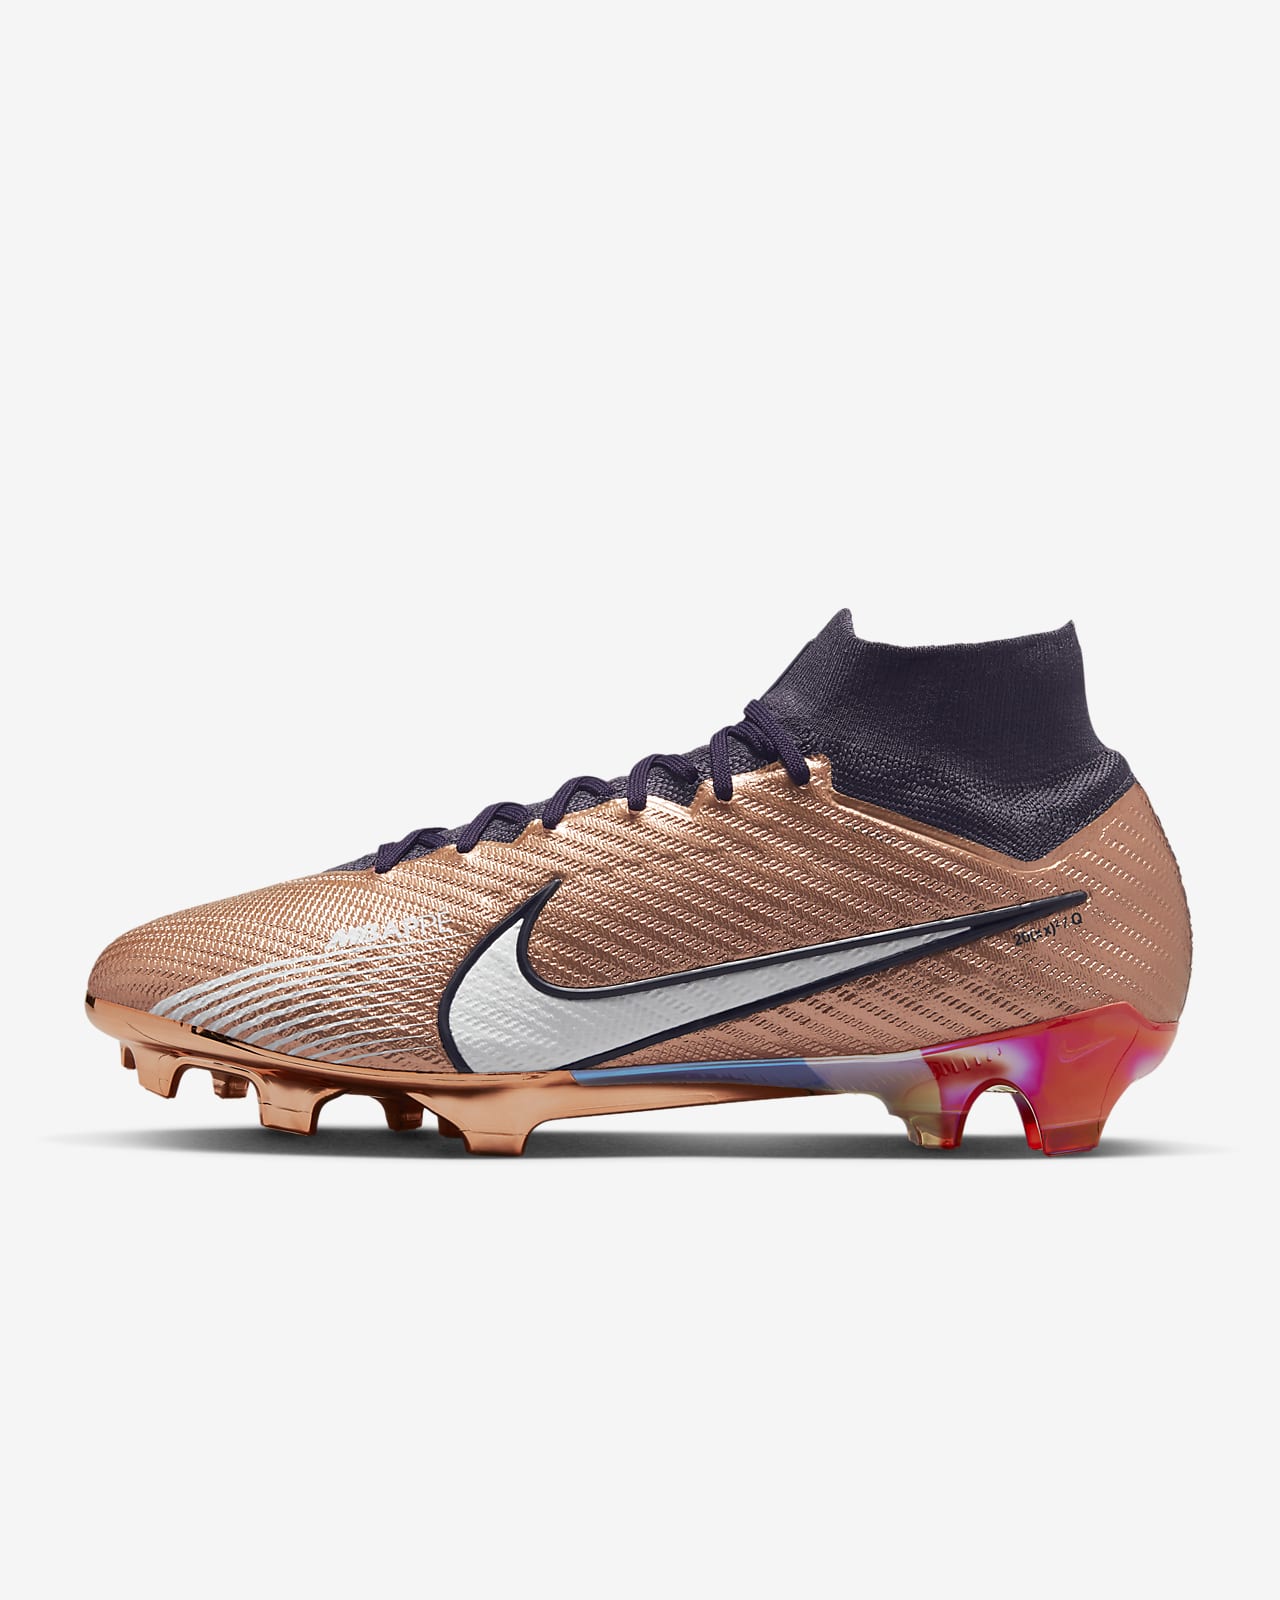 Reserve Cut off Nutrition Nike Zoom Mercurial Superfly 9 Elite KM FG Firm-Ground Football Boot. Nike  ID